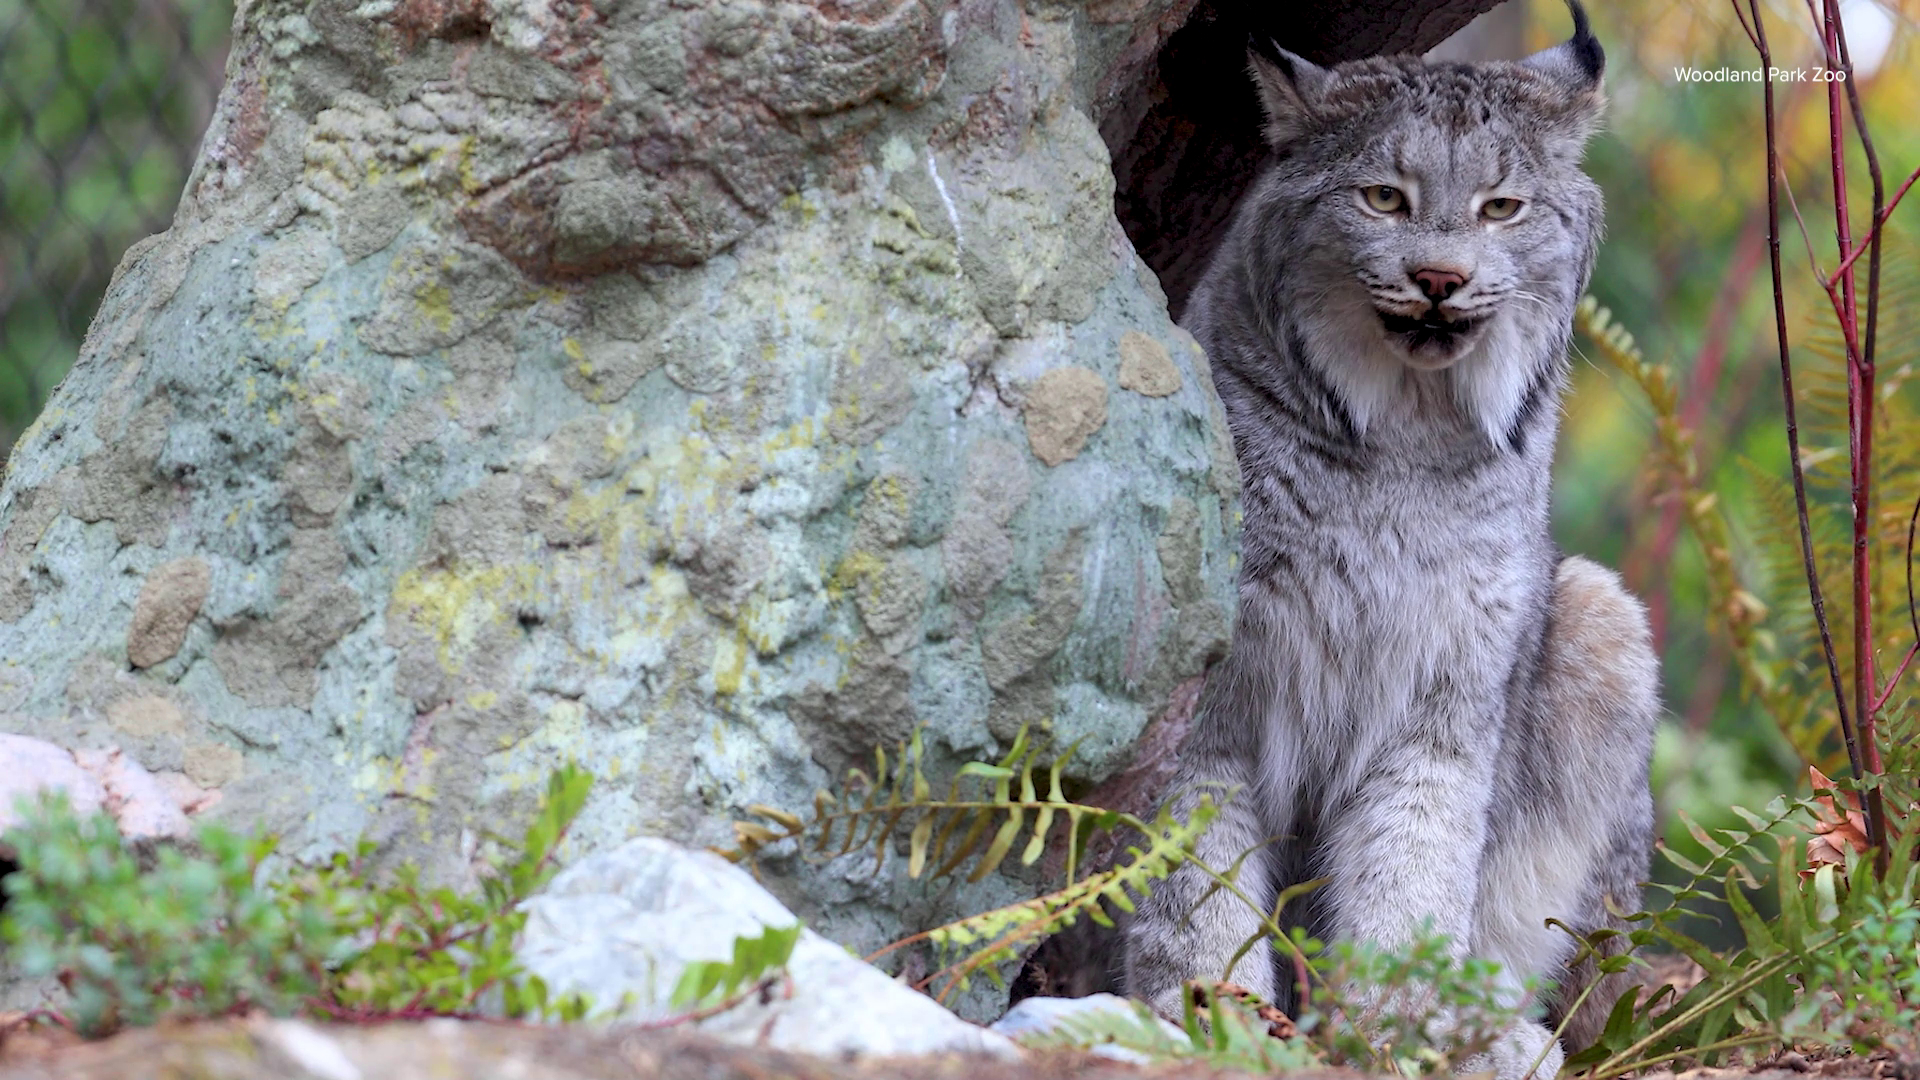 See Marty the lynx at the zoo's "Living Northwest Trail." Sponsored by Woodland Park Zoo.